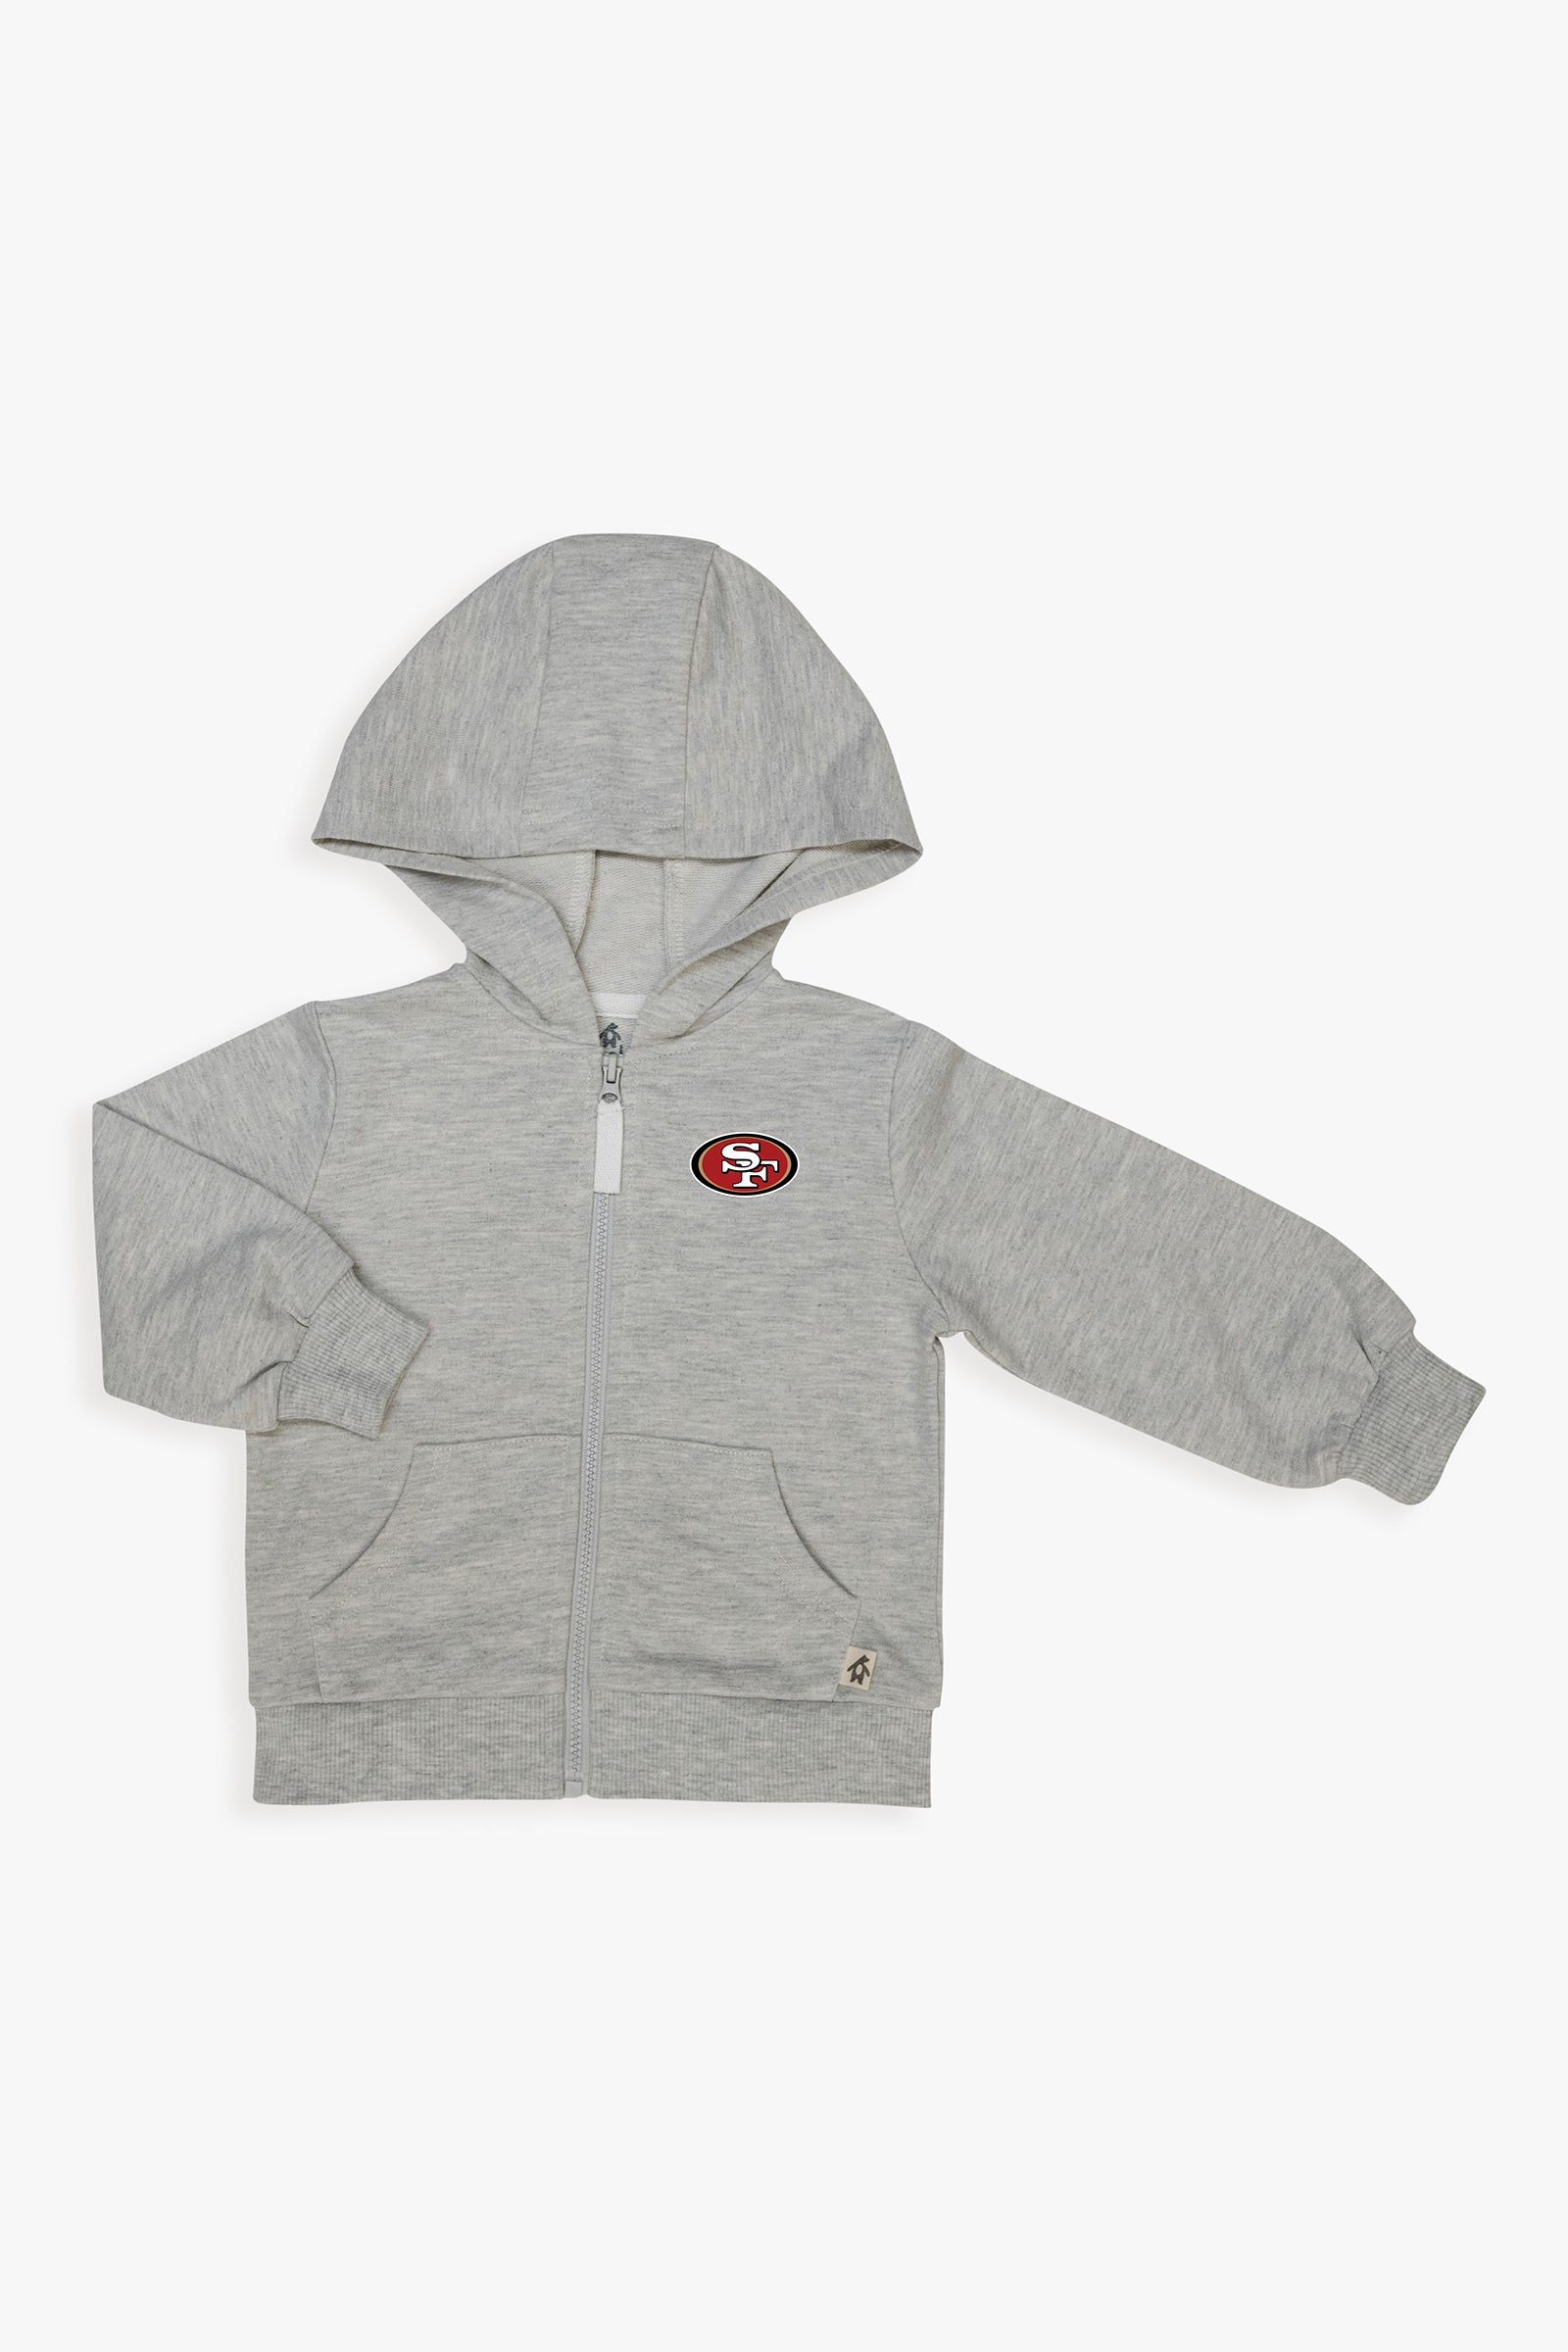 Football Baby Team Zip-Up Toddler Logo French Hoodie NFL Terry Unisex Grey